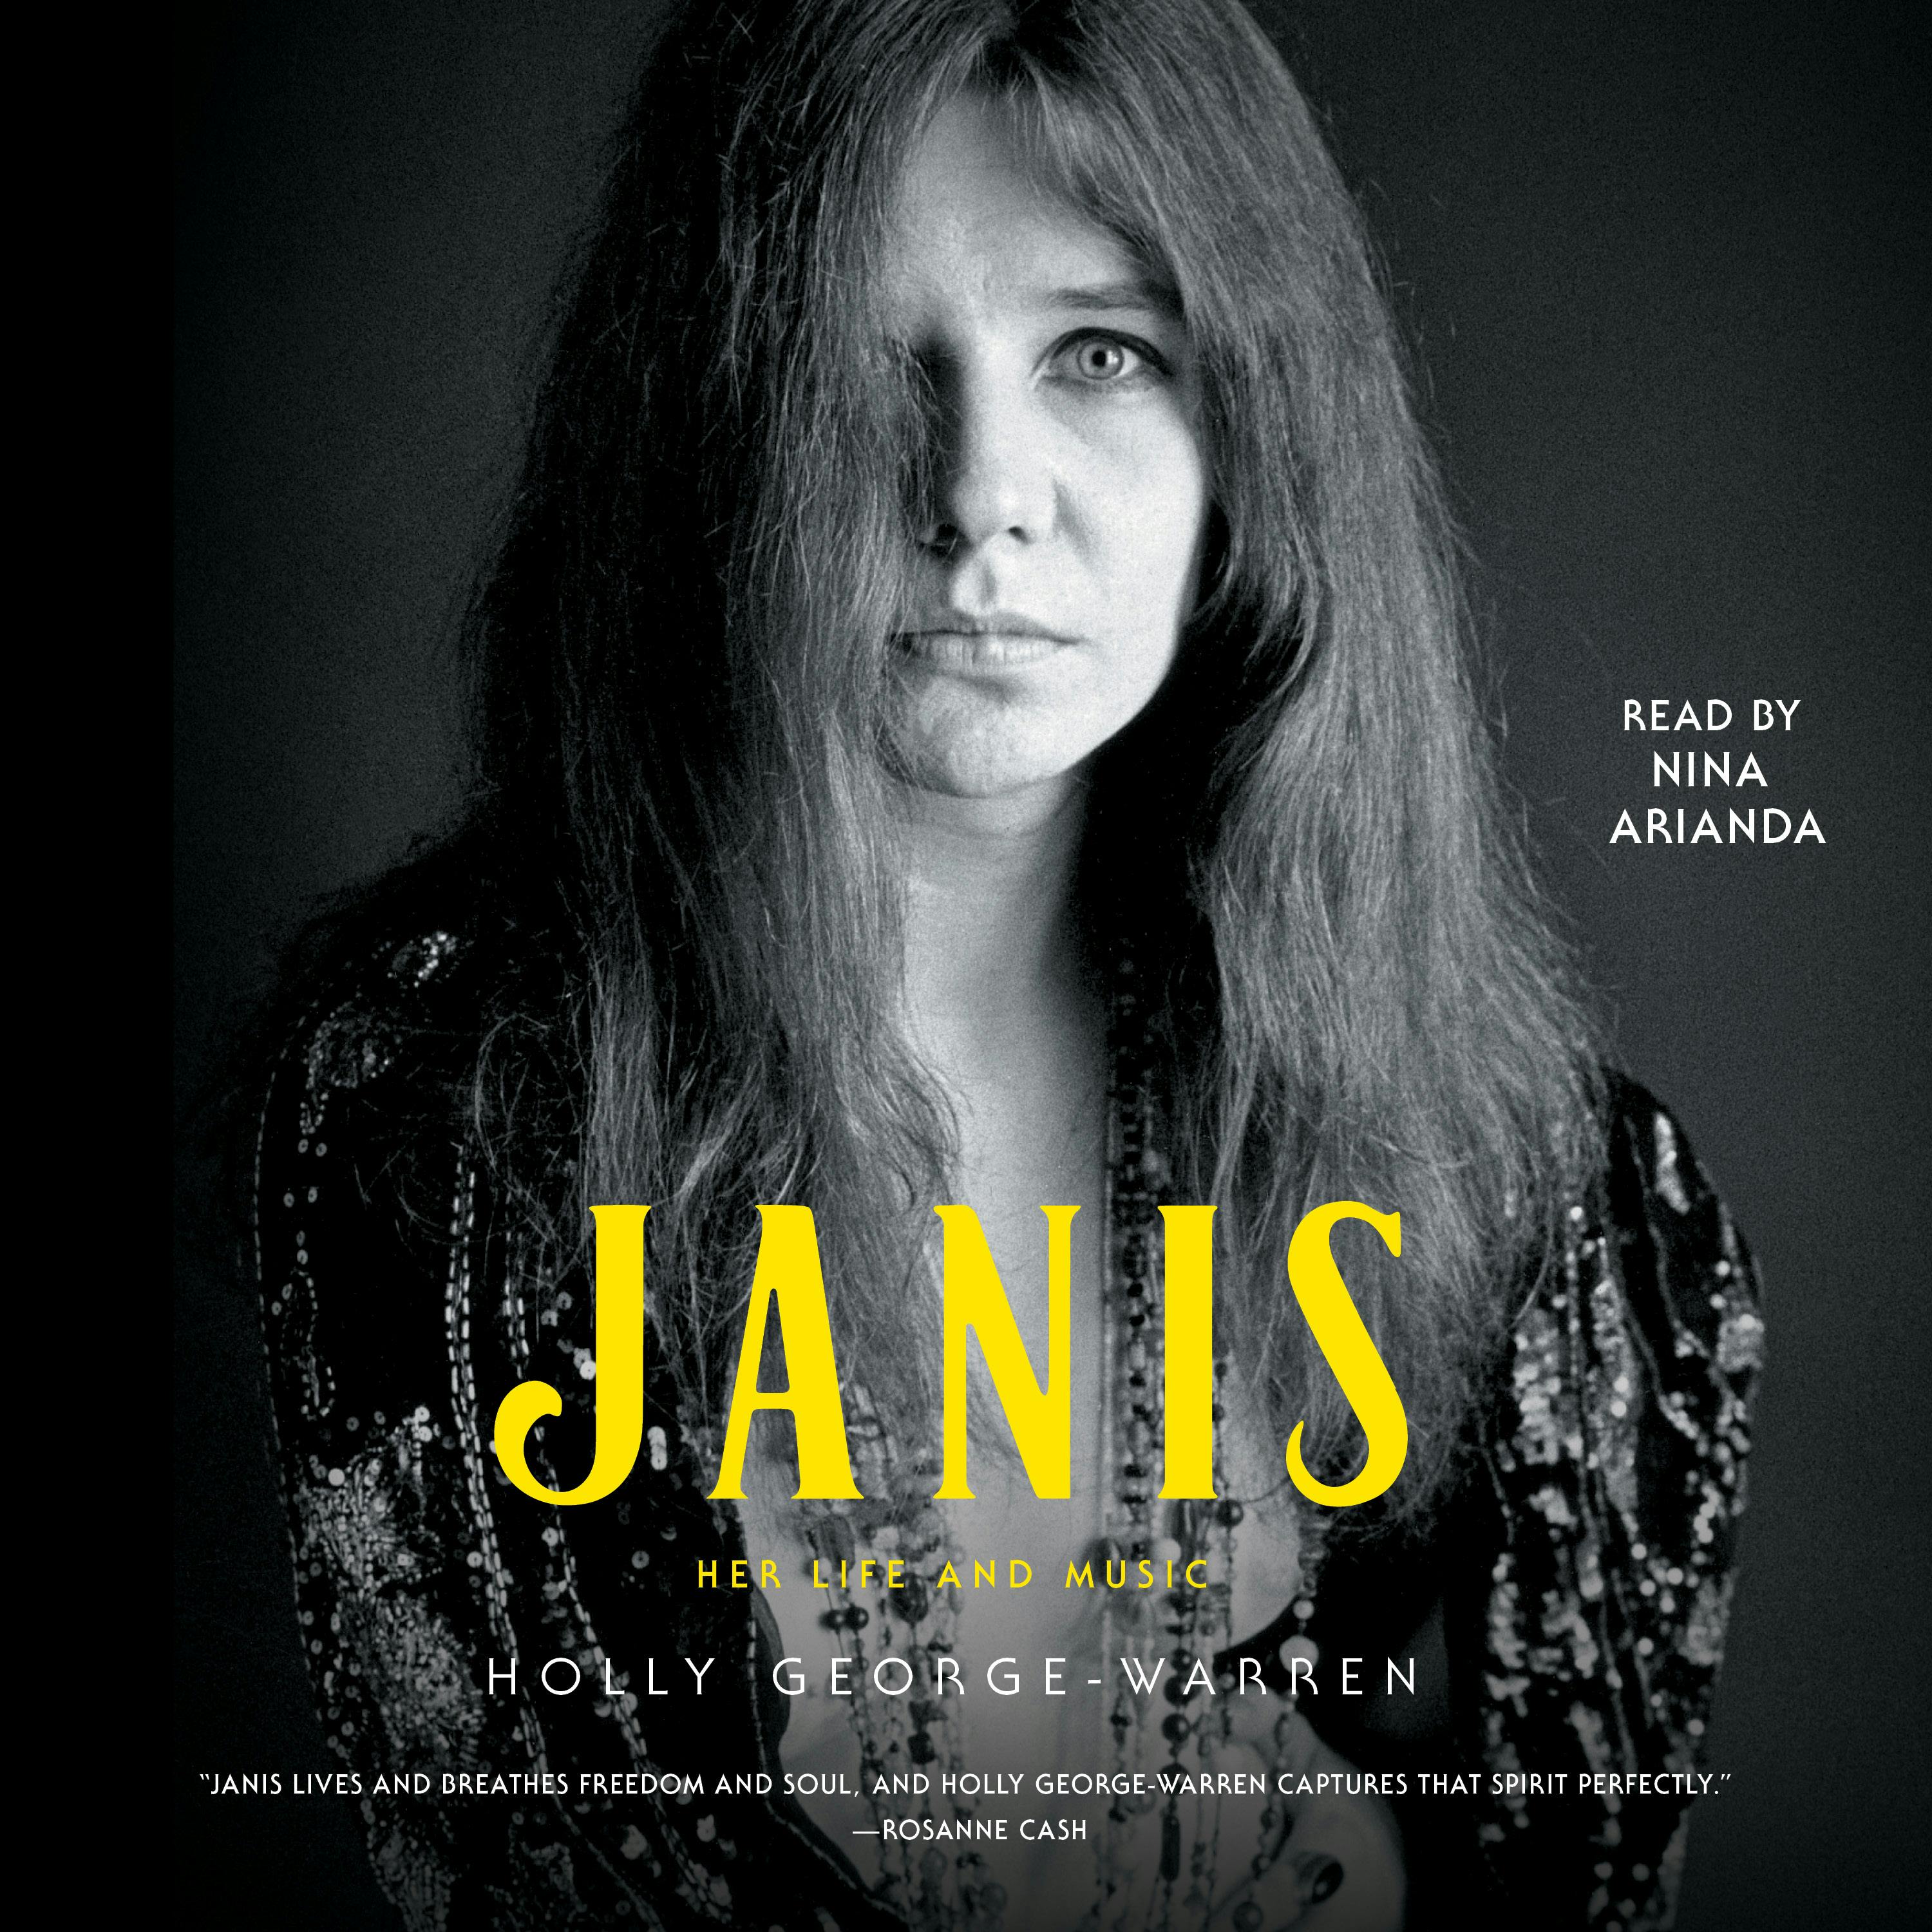 Janis: Her Life and Music - Holly George-Warren